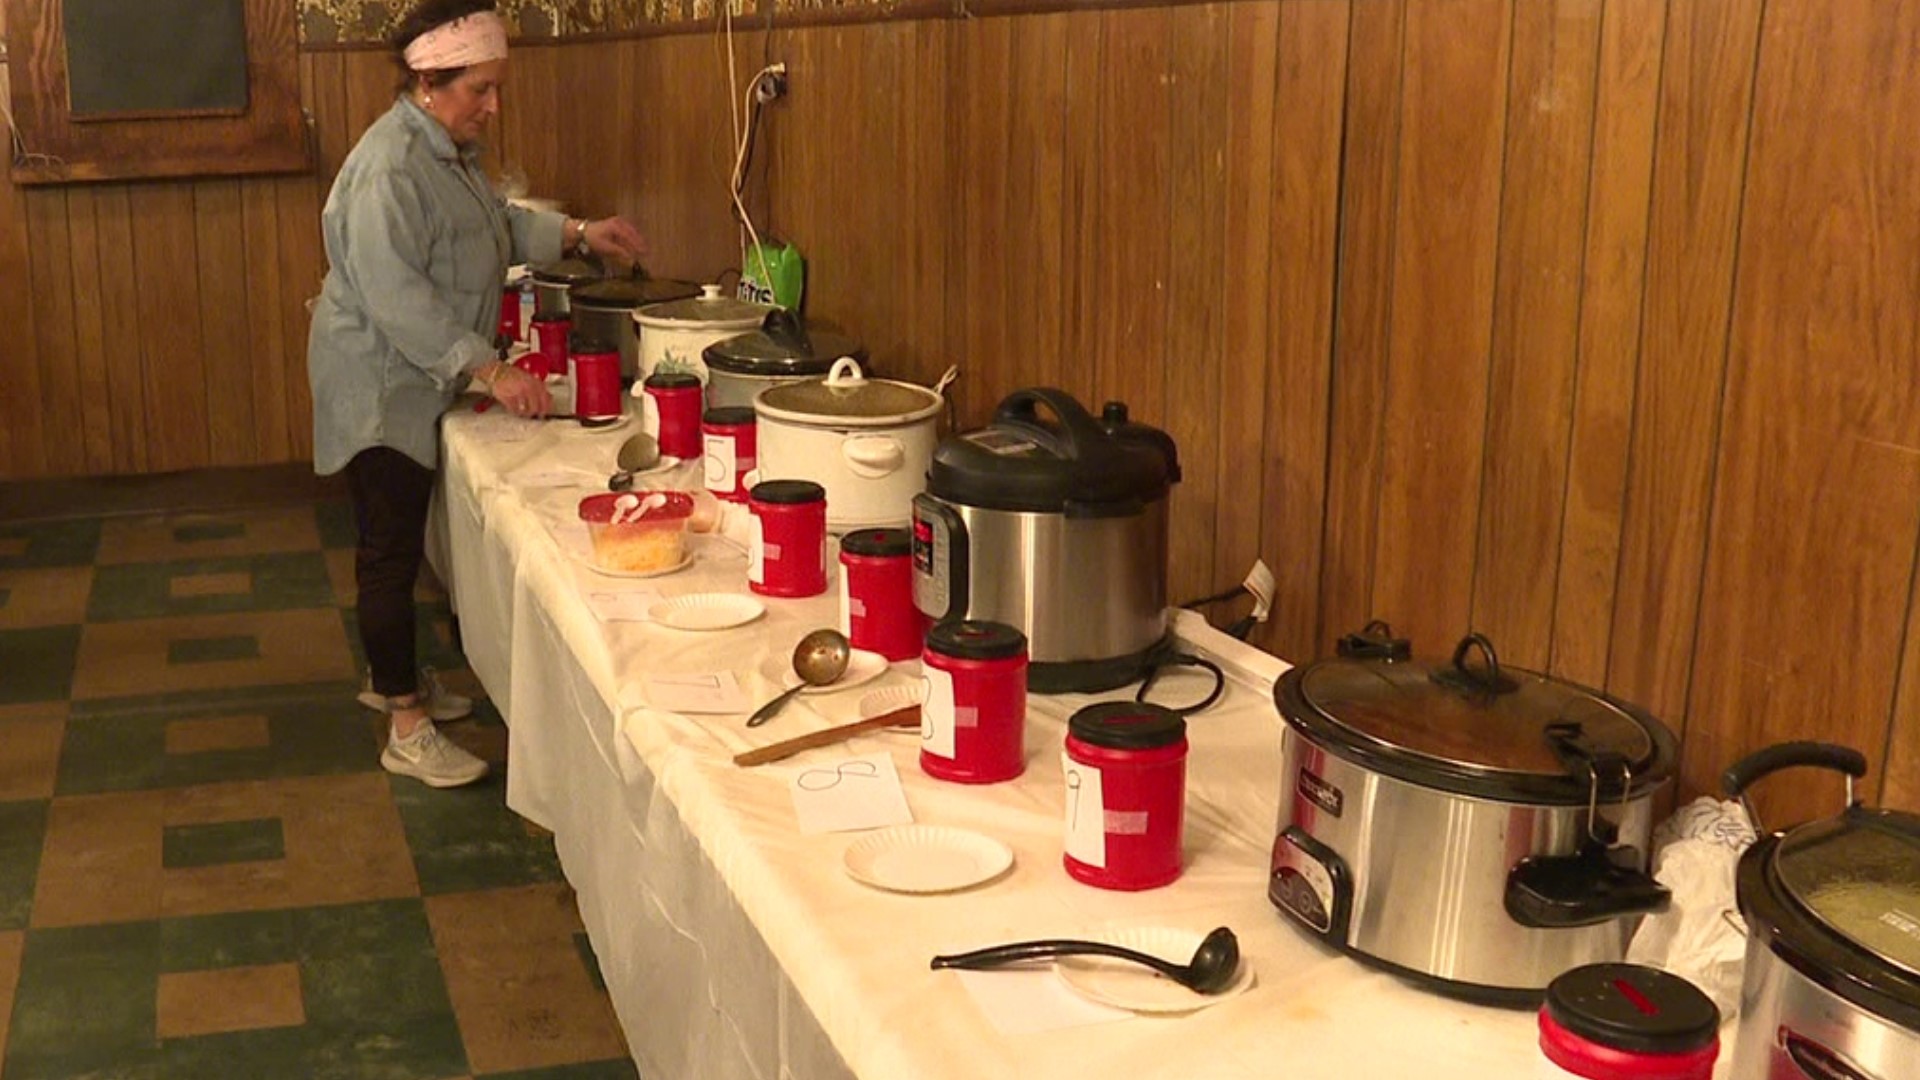 The event took place at the Hilldale ITO Club from noon to 4 p.m. on Sunday.